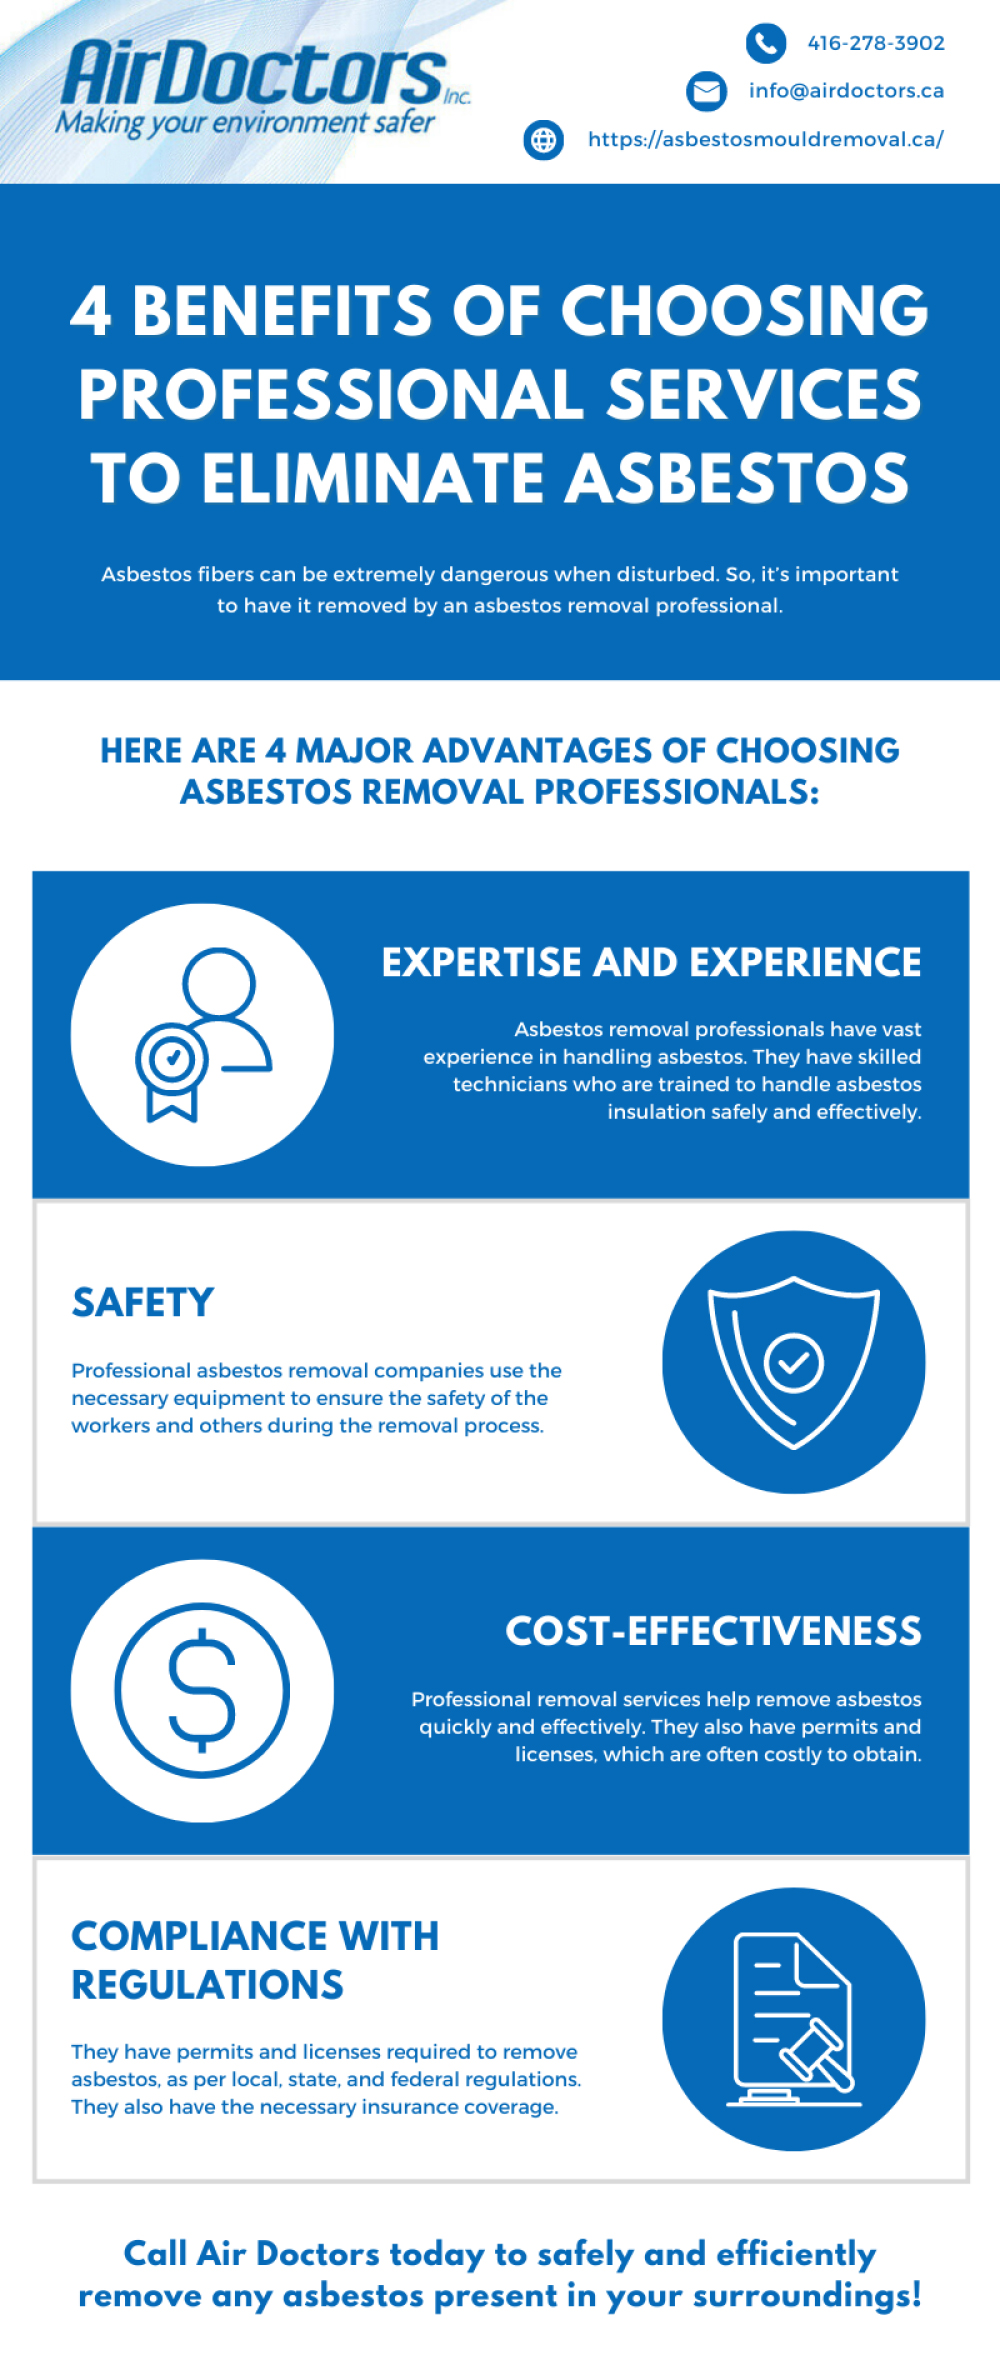 4 Benefits of Choosing Professional Services to Eliminate Asbestos